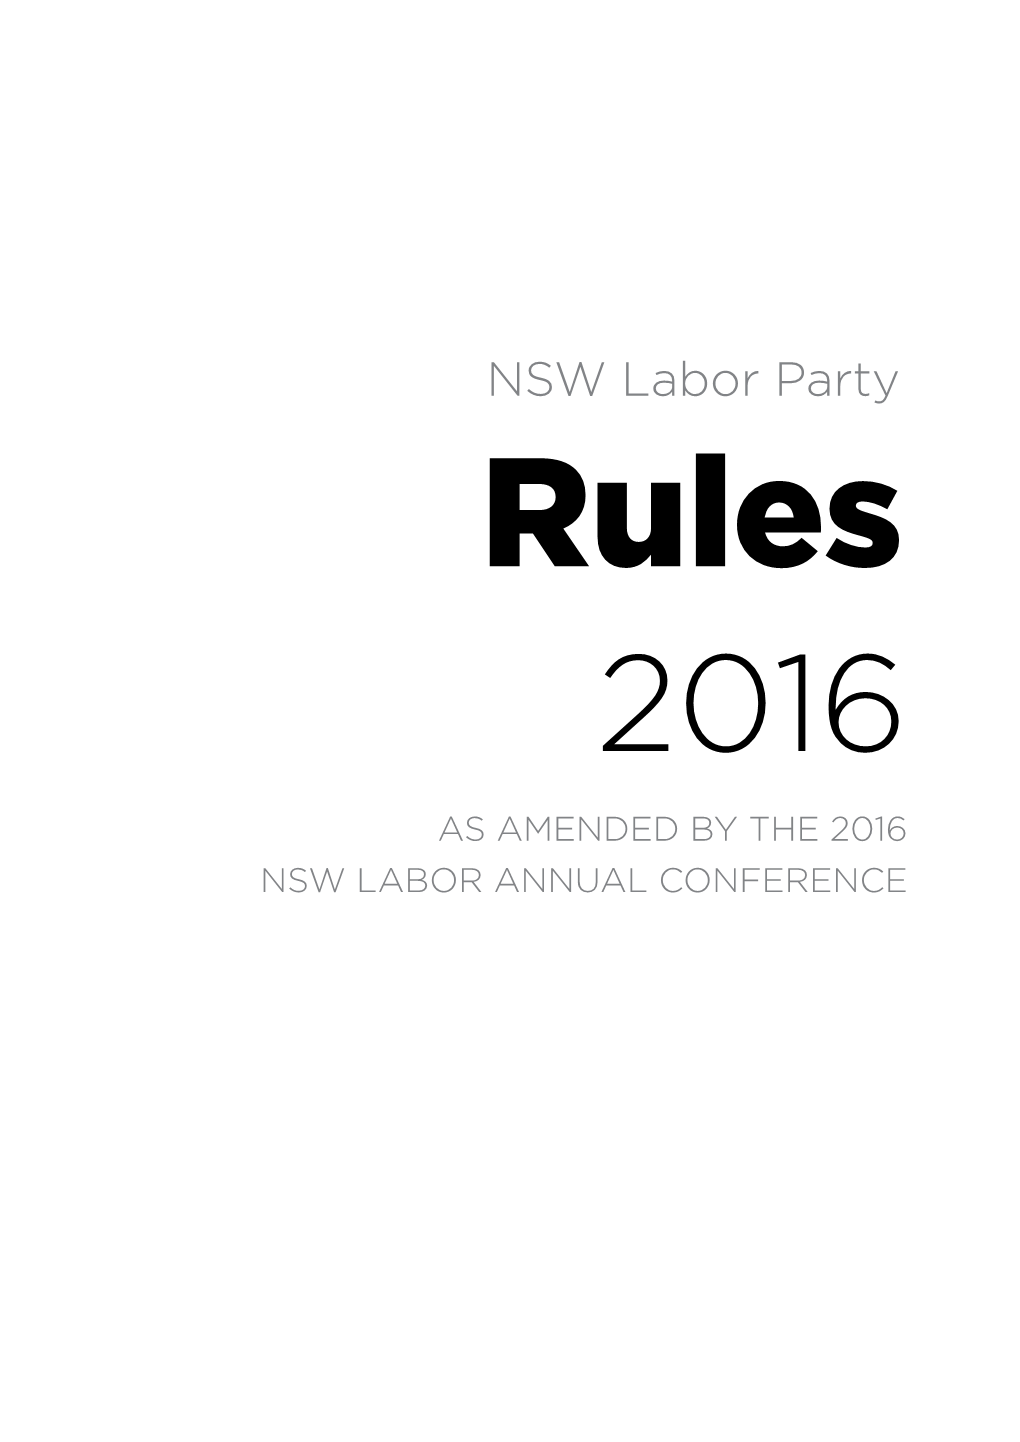 NSW Labor Party Rules 2016 AS AMENDED by the 2016 NSW LABOR ANNUAL CONFERENCE RULES 2016